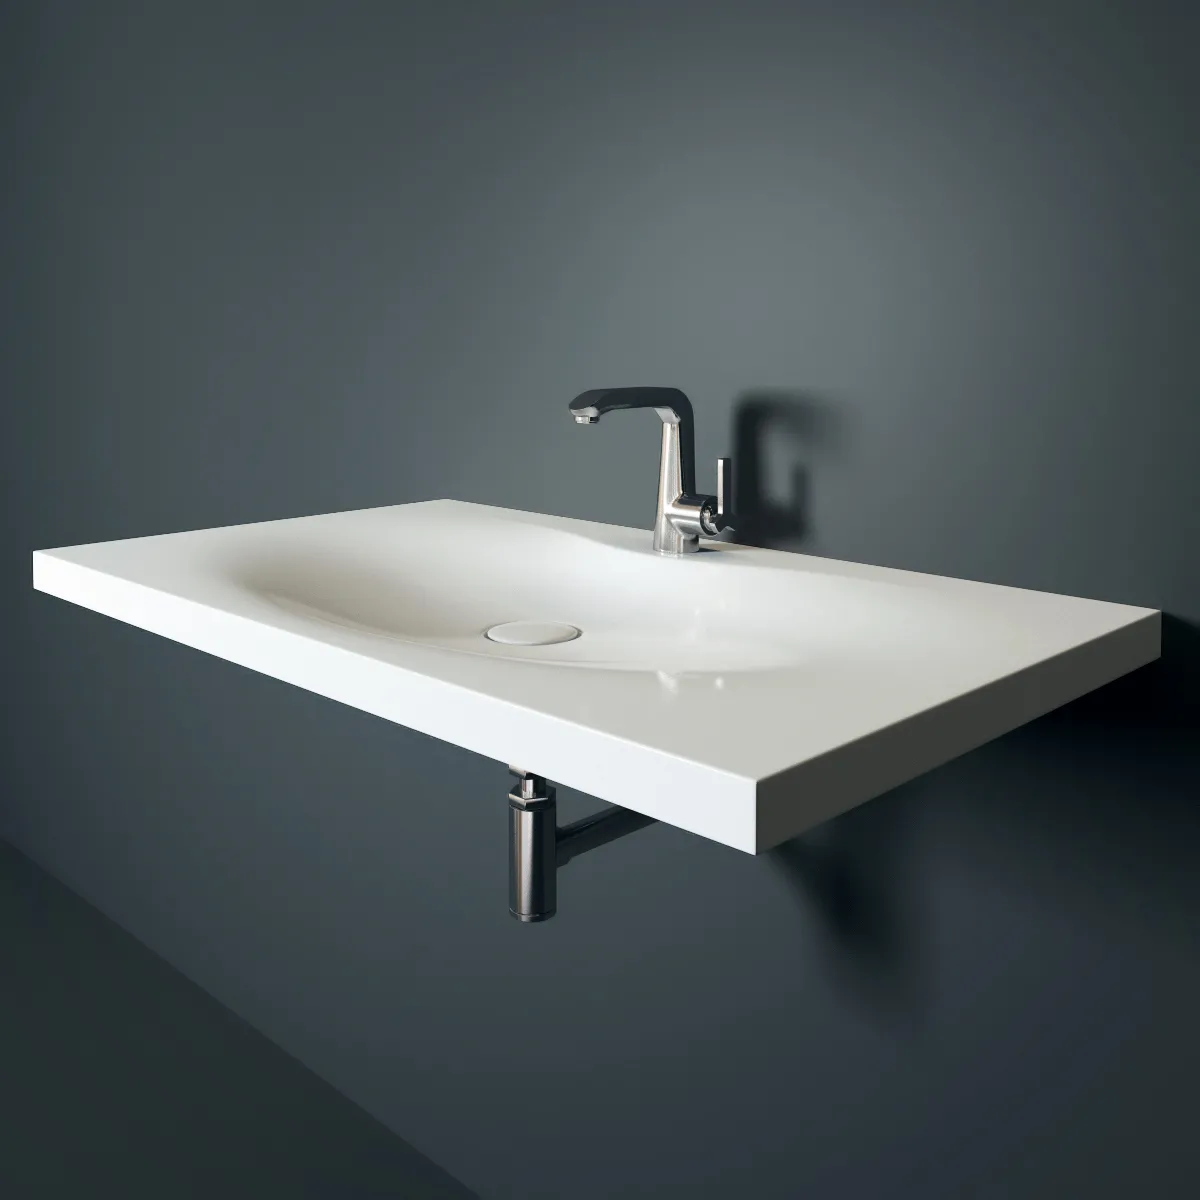 Sink and faucet Bravat Waterfall F173107C – 2867